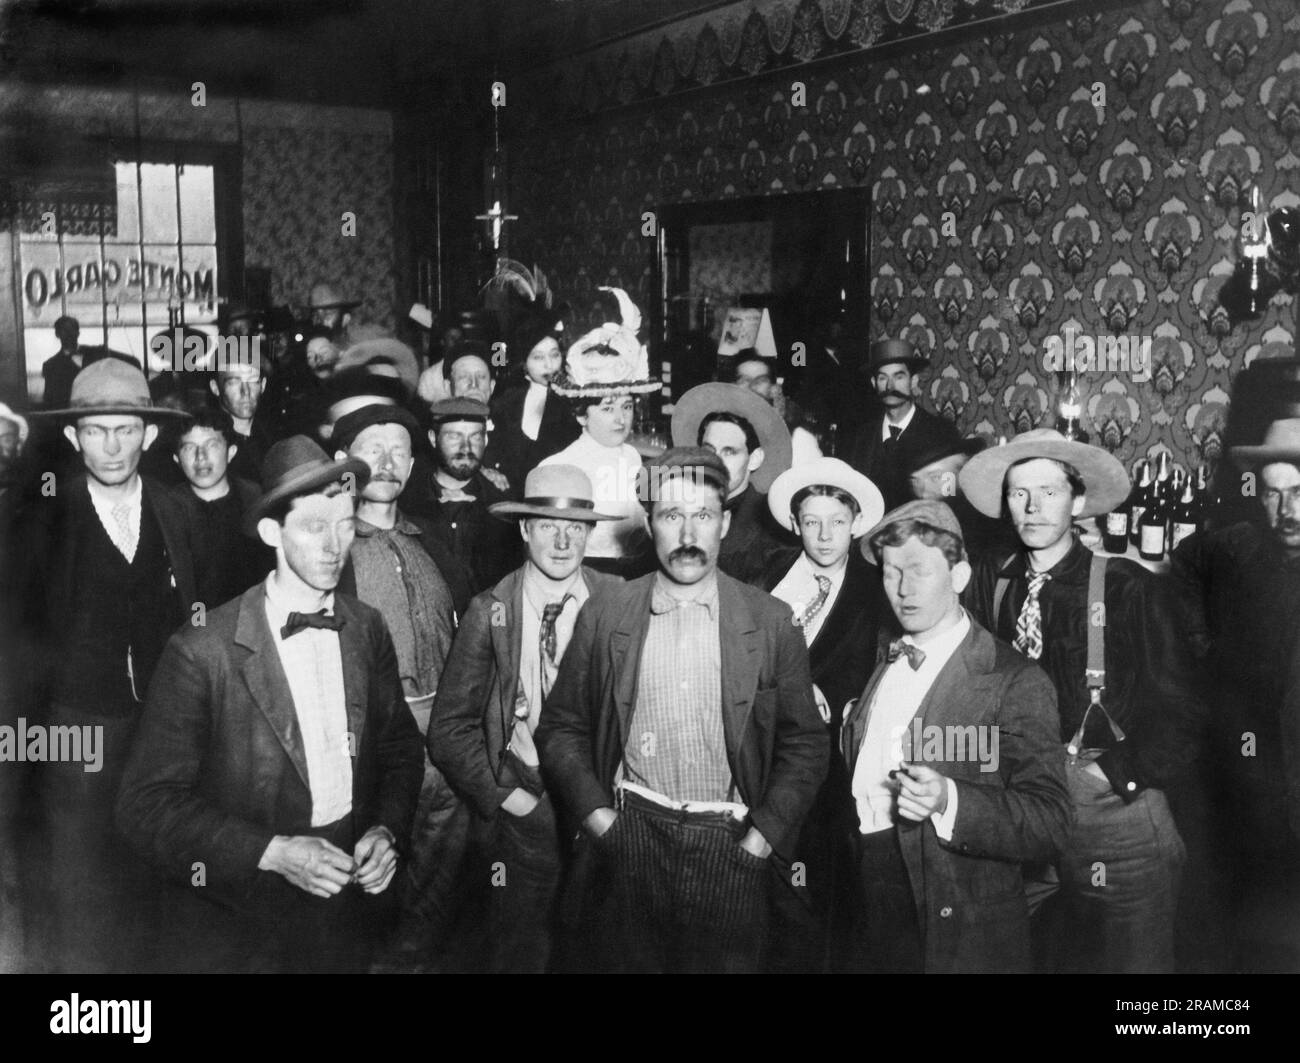 Dawson City, Yukon Territory, Canada:  c. 1898 The interior of the Monte Carlo Saloon in Dawson City with its numerous men and two women. Stock Photo